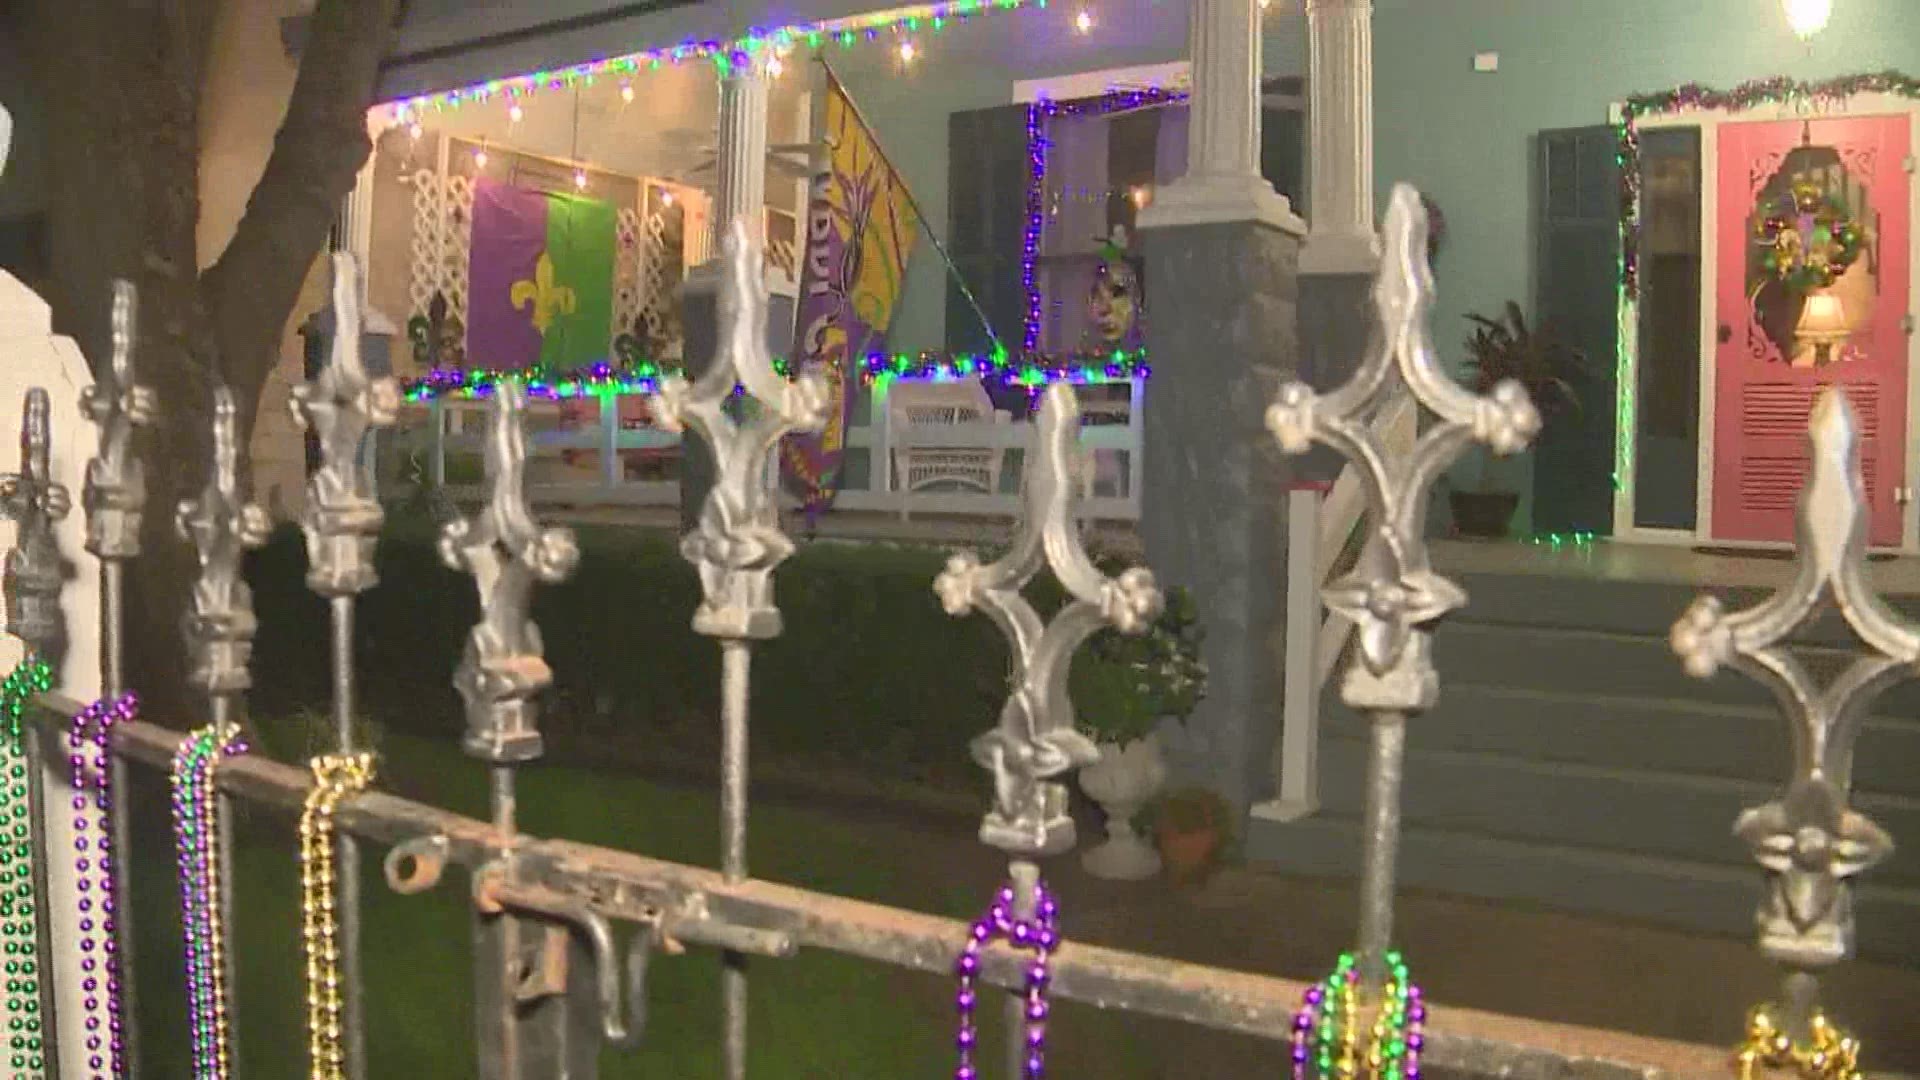 It's a trend that's caught on too in Galveston where there will also be no Mardi Gras parades and parties this year.